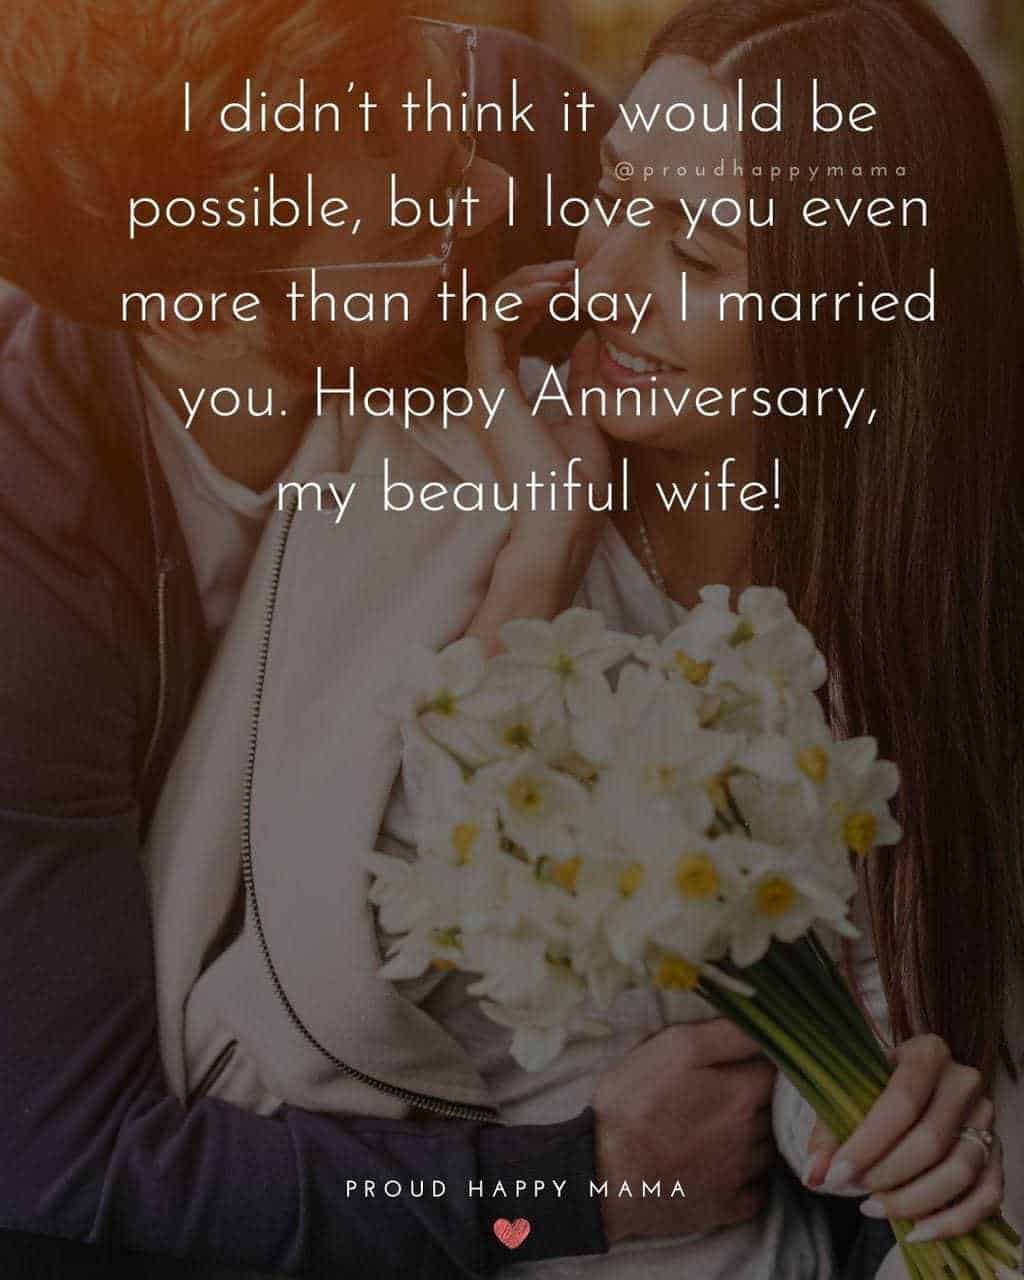 Wedding Anniversary Wishes For Wide - I didnt think it would be possible, but I love you even more than the day I married you. Happy Anniversary my beautiful wife!